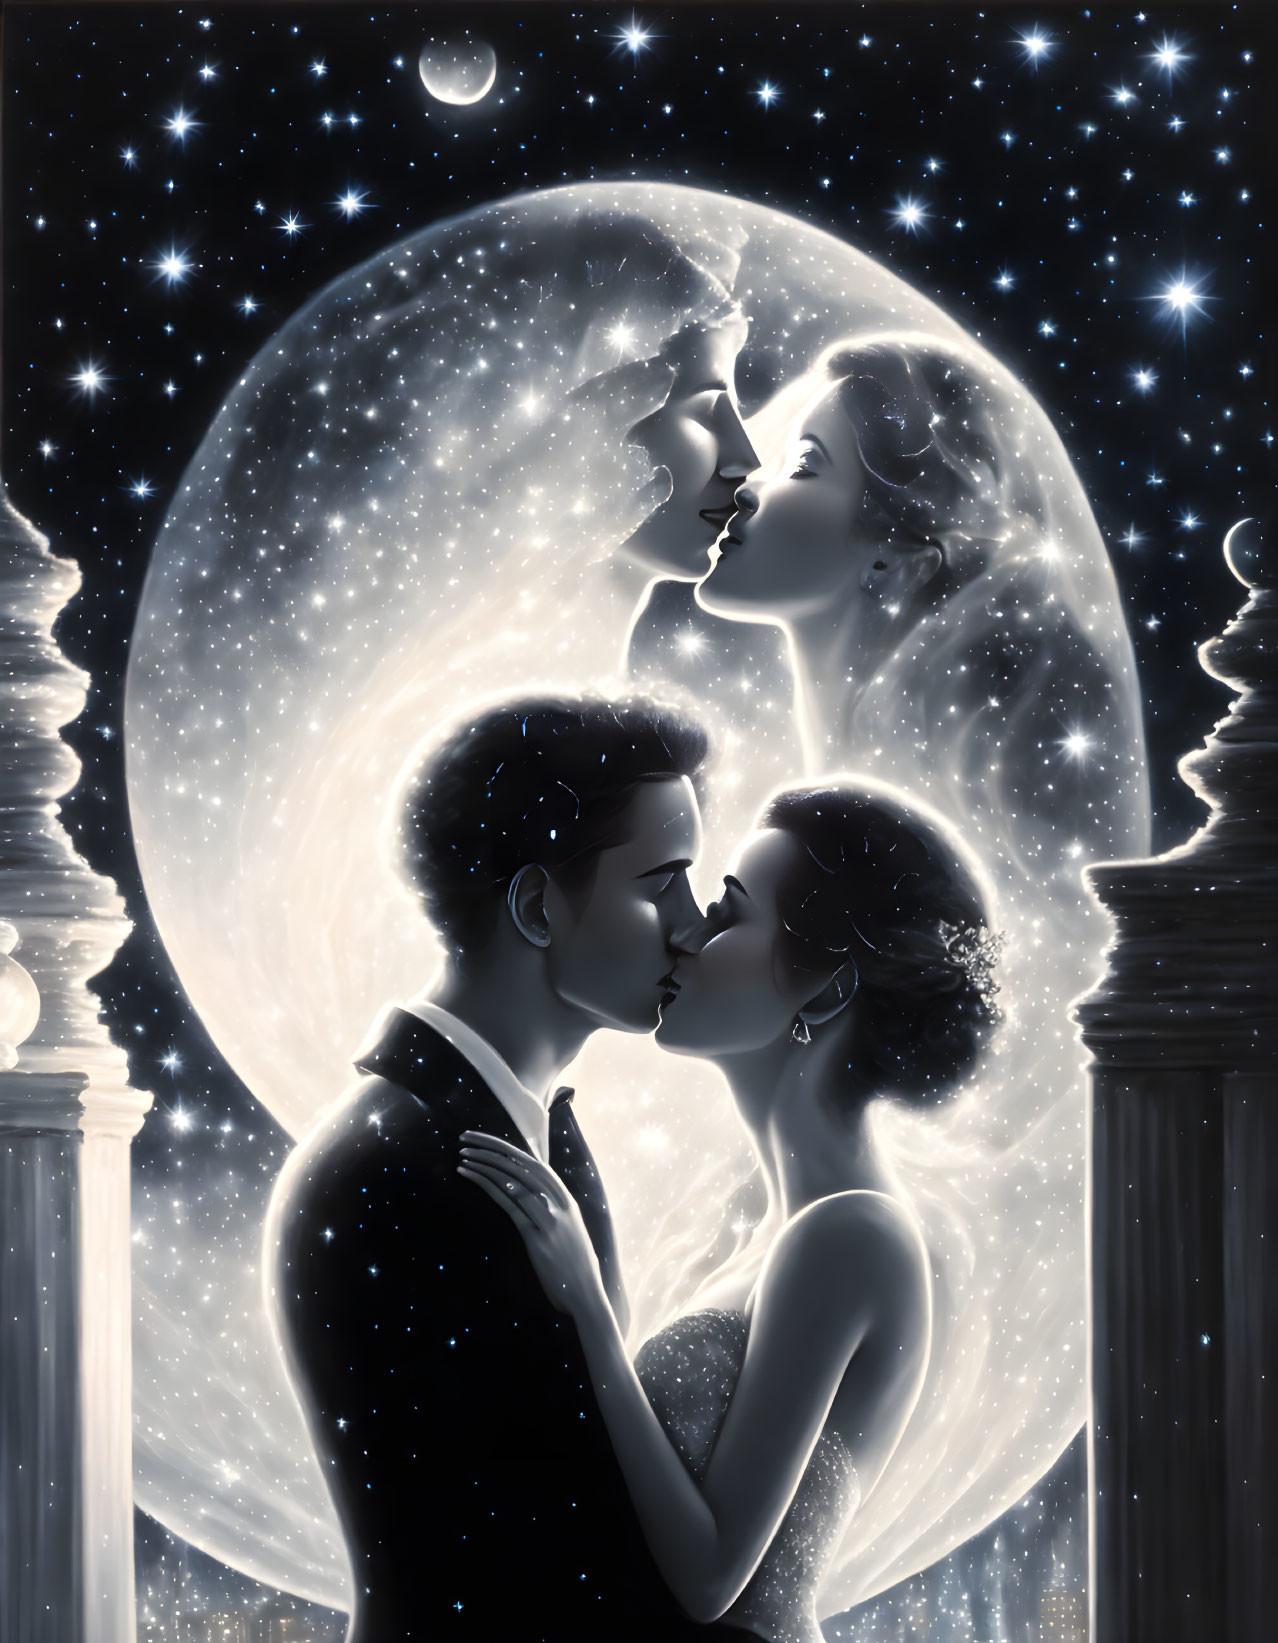 Couple about to kiss under moonlit sky and classical pillars